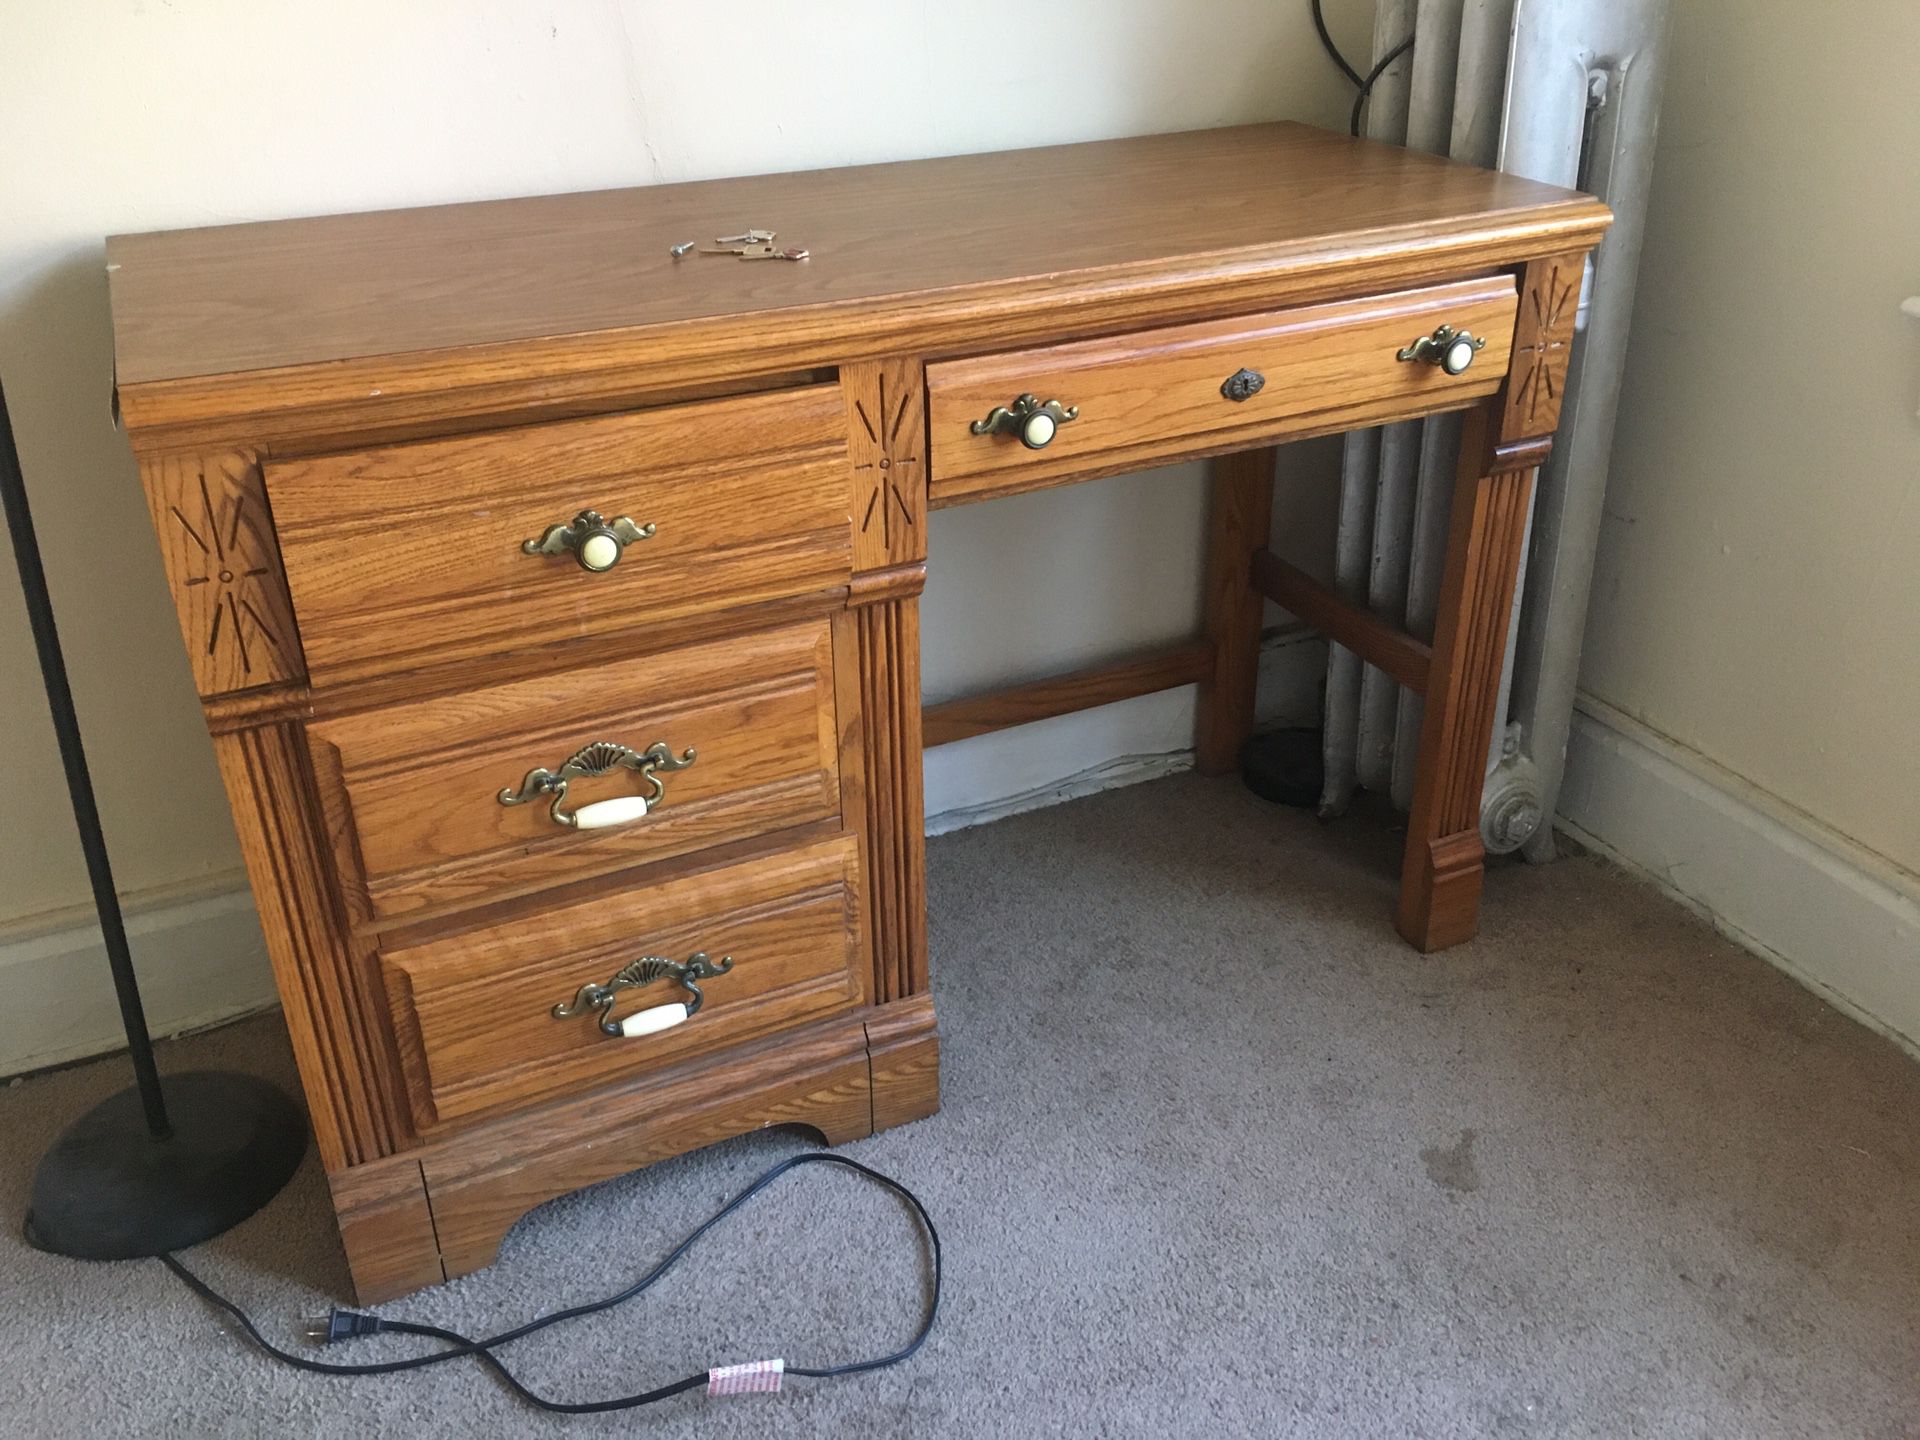 Vintage wooden desk with drawers